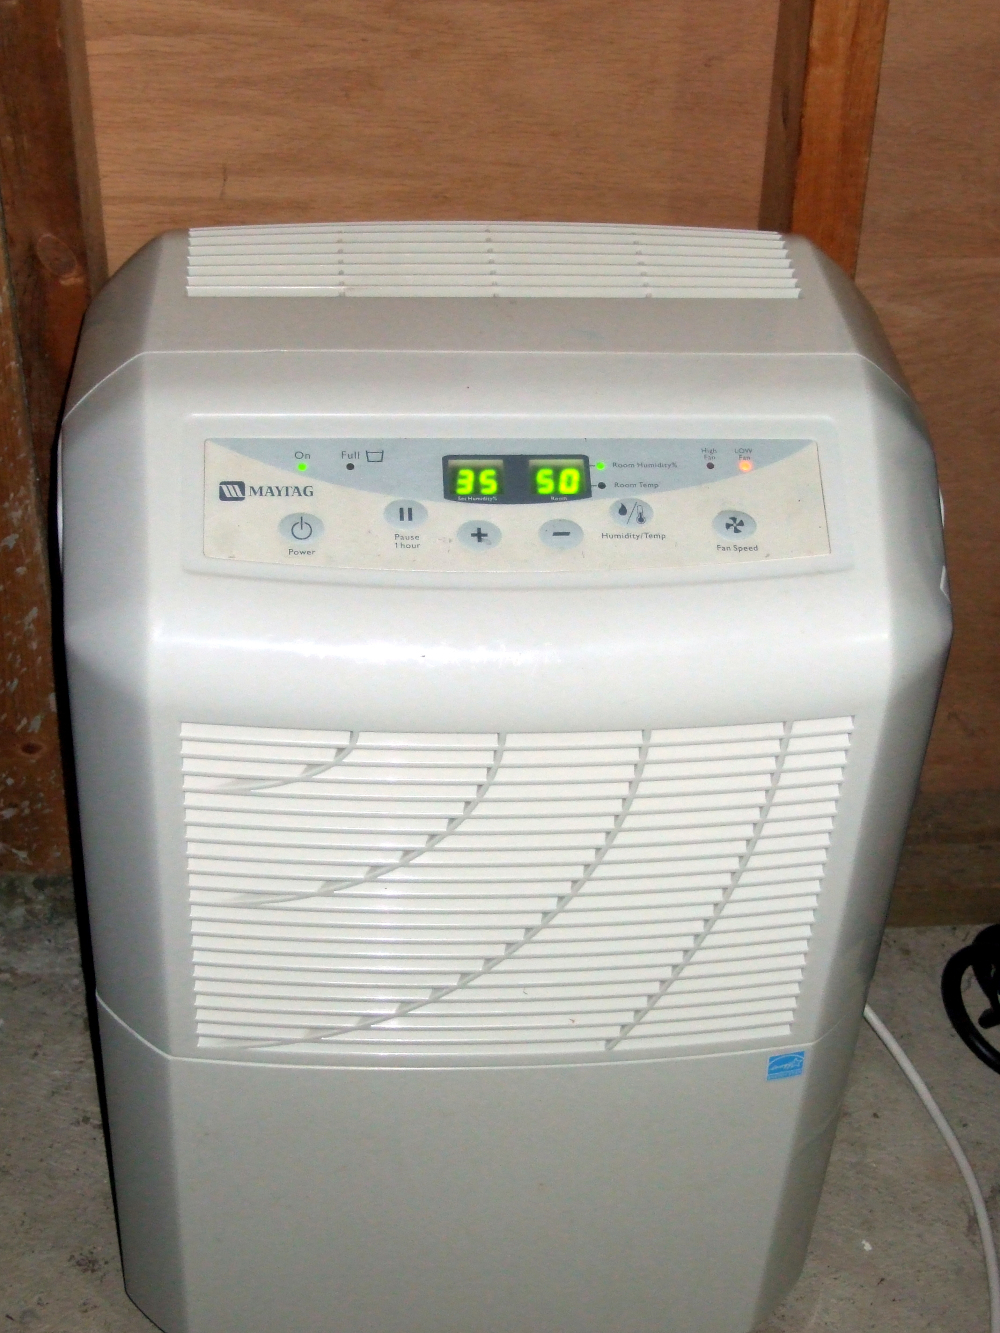 Get $30 for your old dehumidifier 12/4 At Curtis + $30 rebate on a new one!